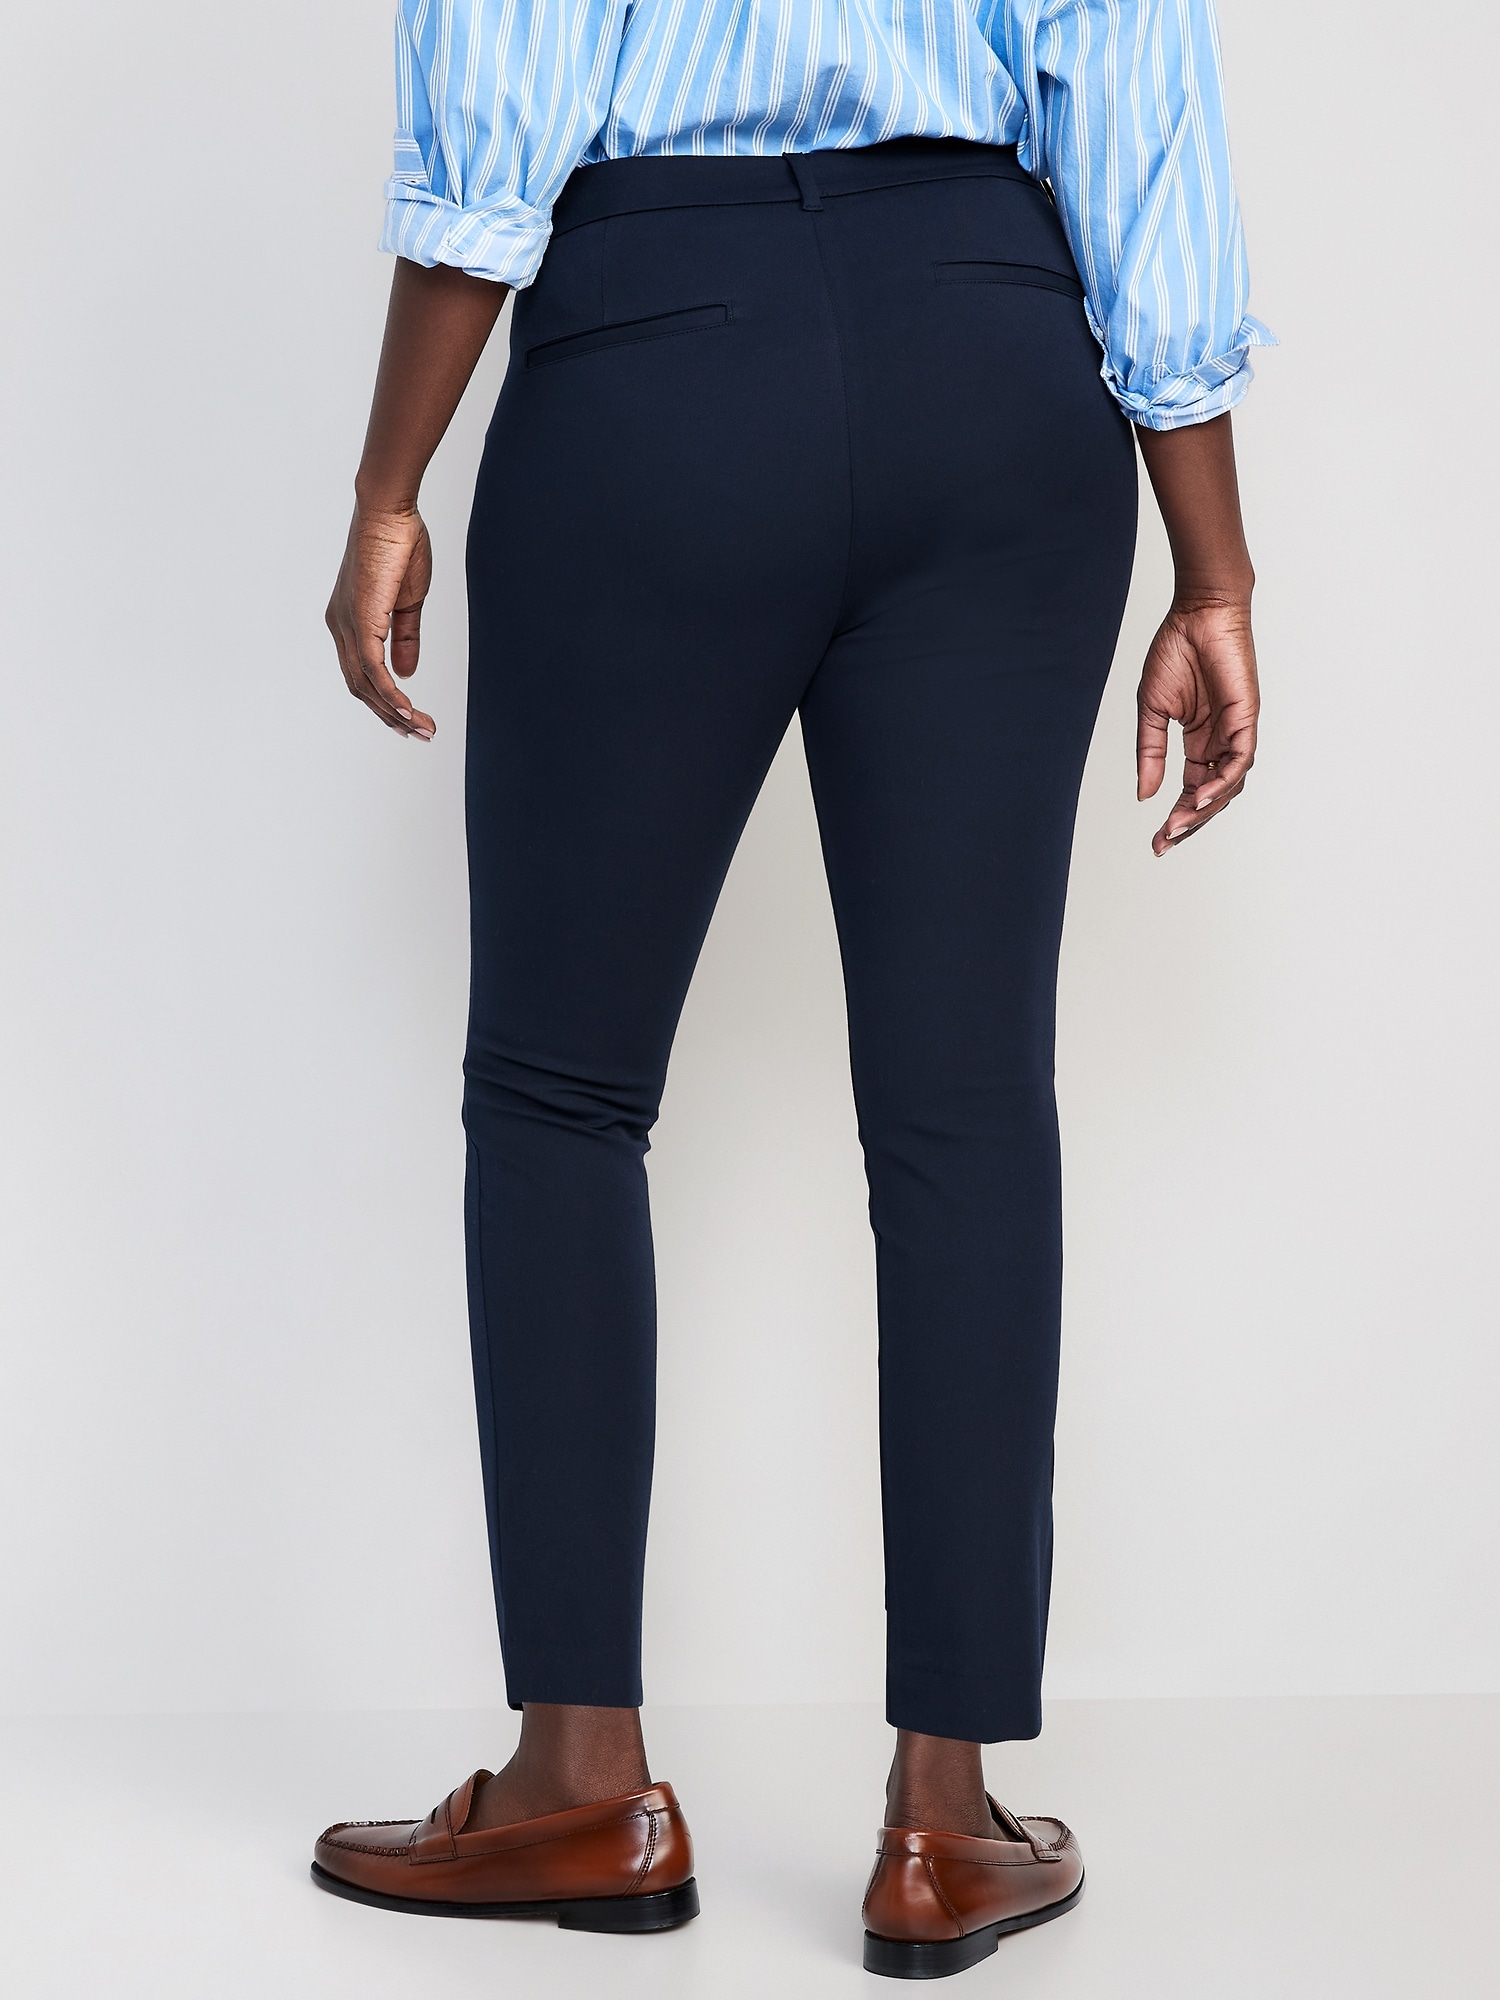 High-Waisted Pixie Skinny Ankle Pants | Old Navy